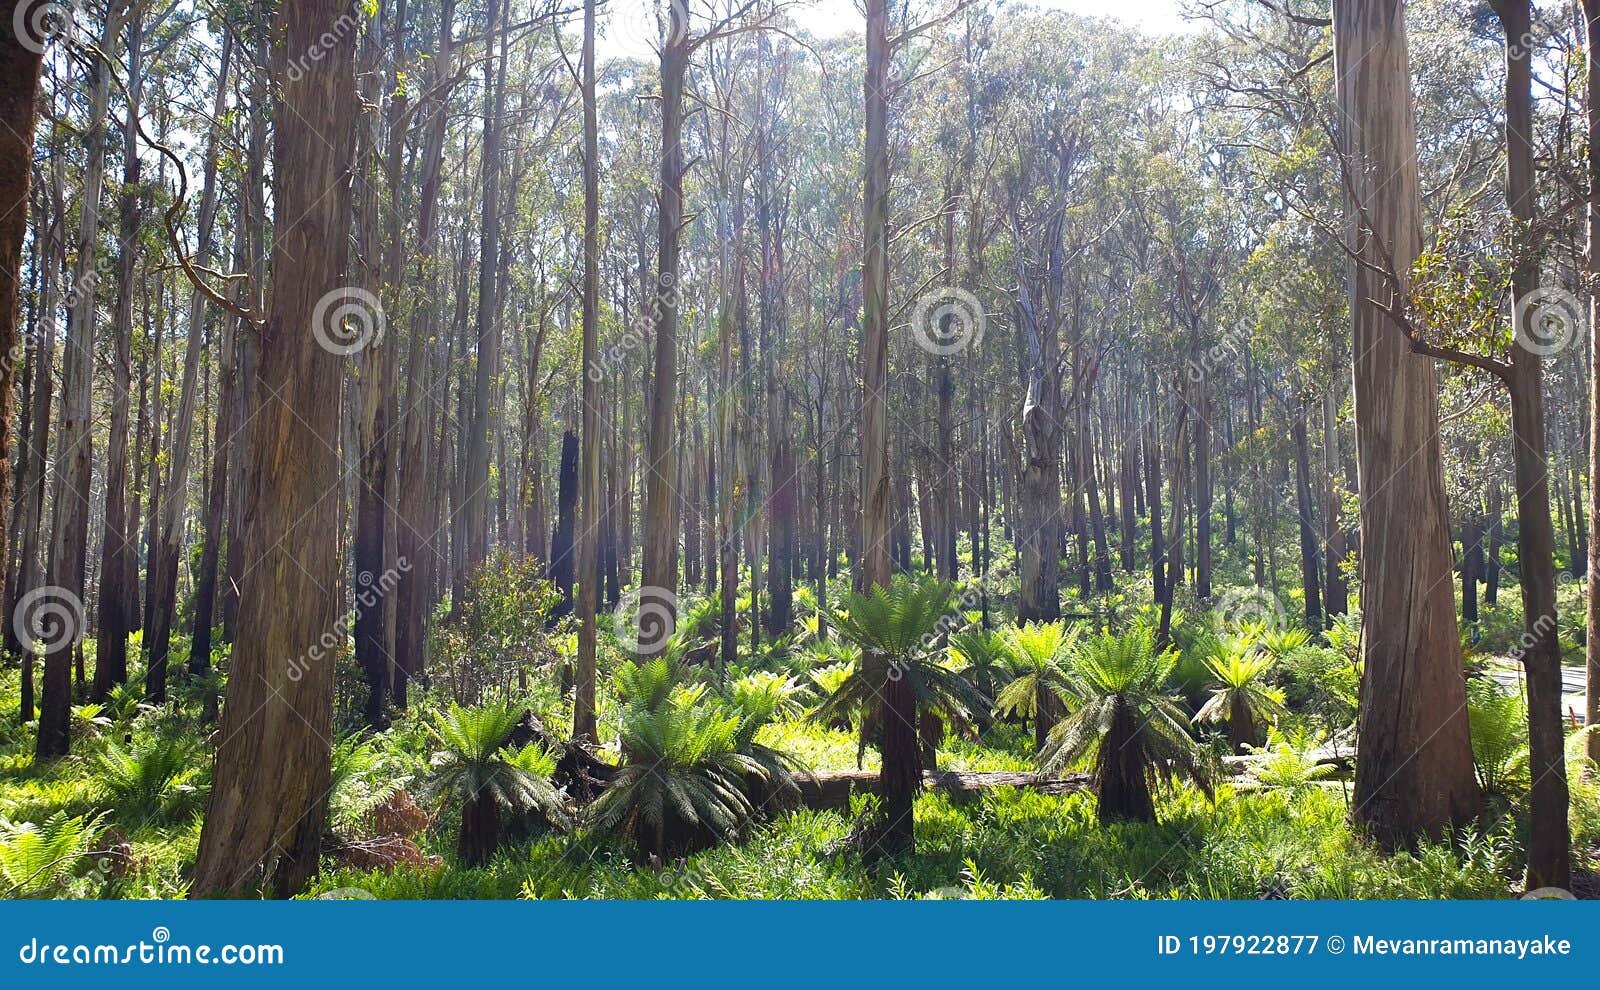 a dense turpentine tree forest